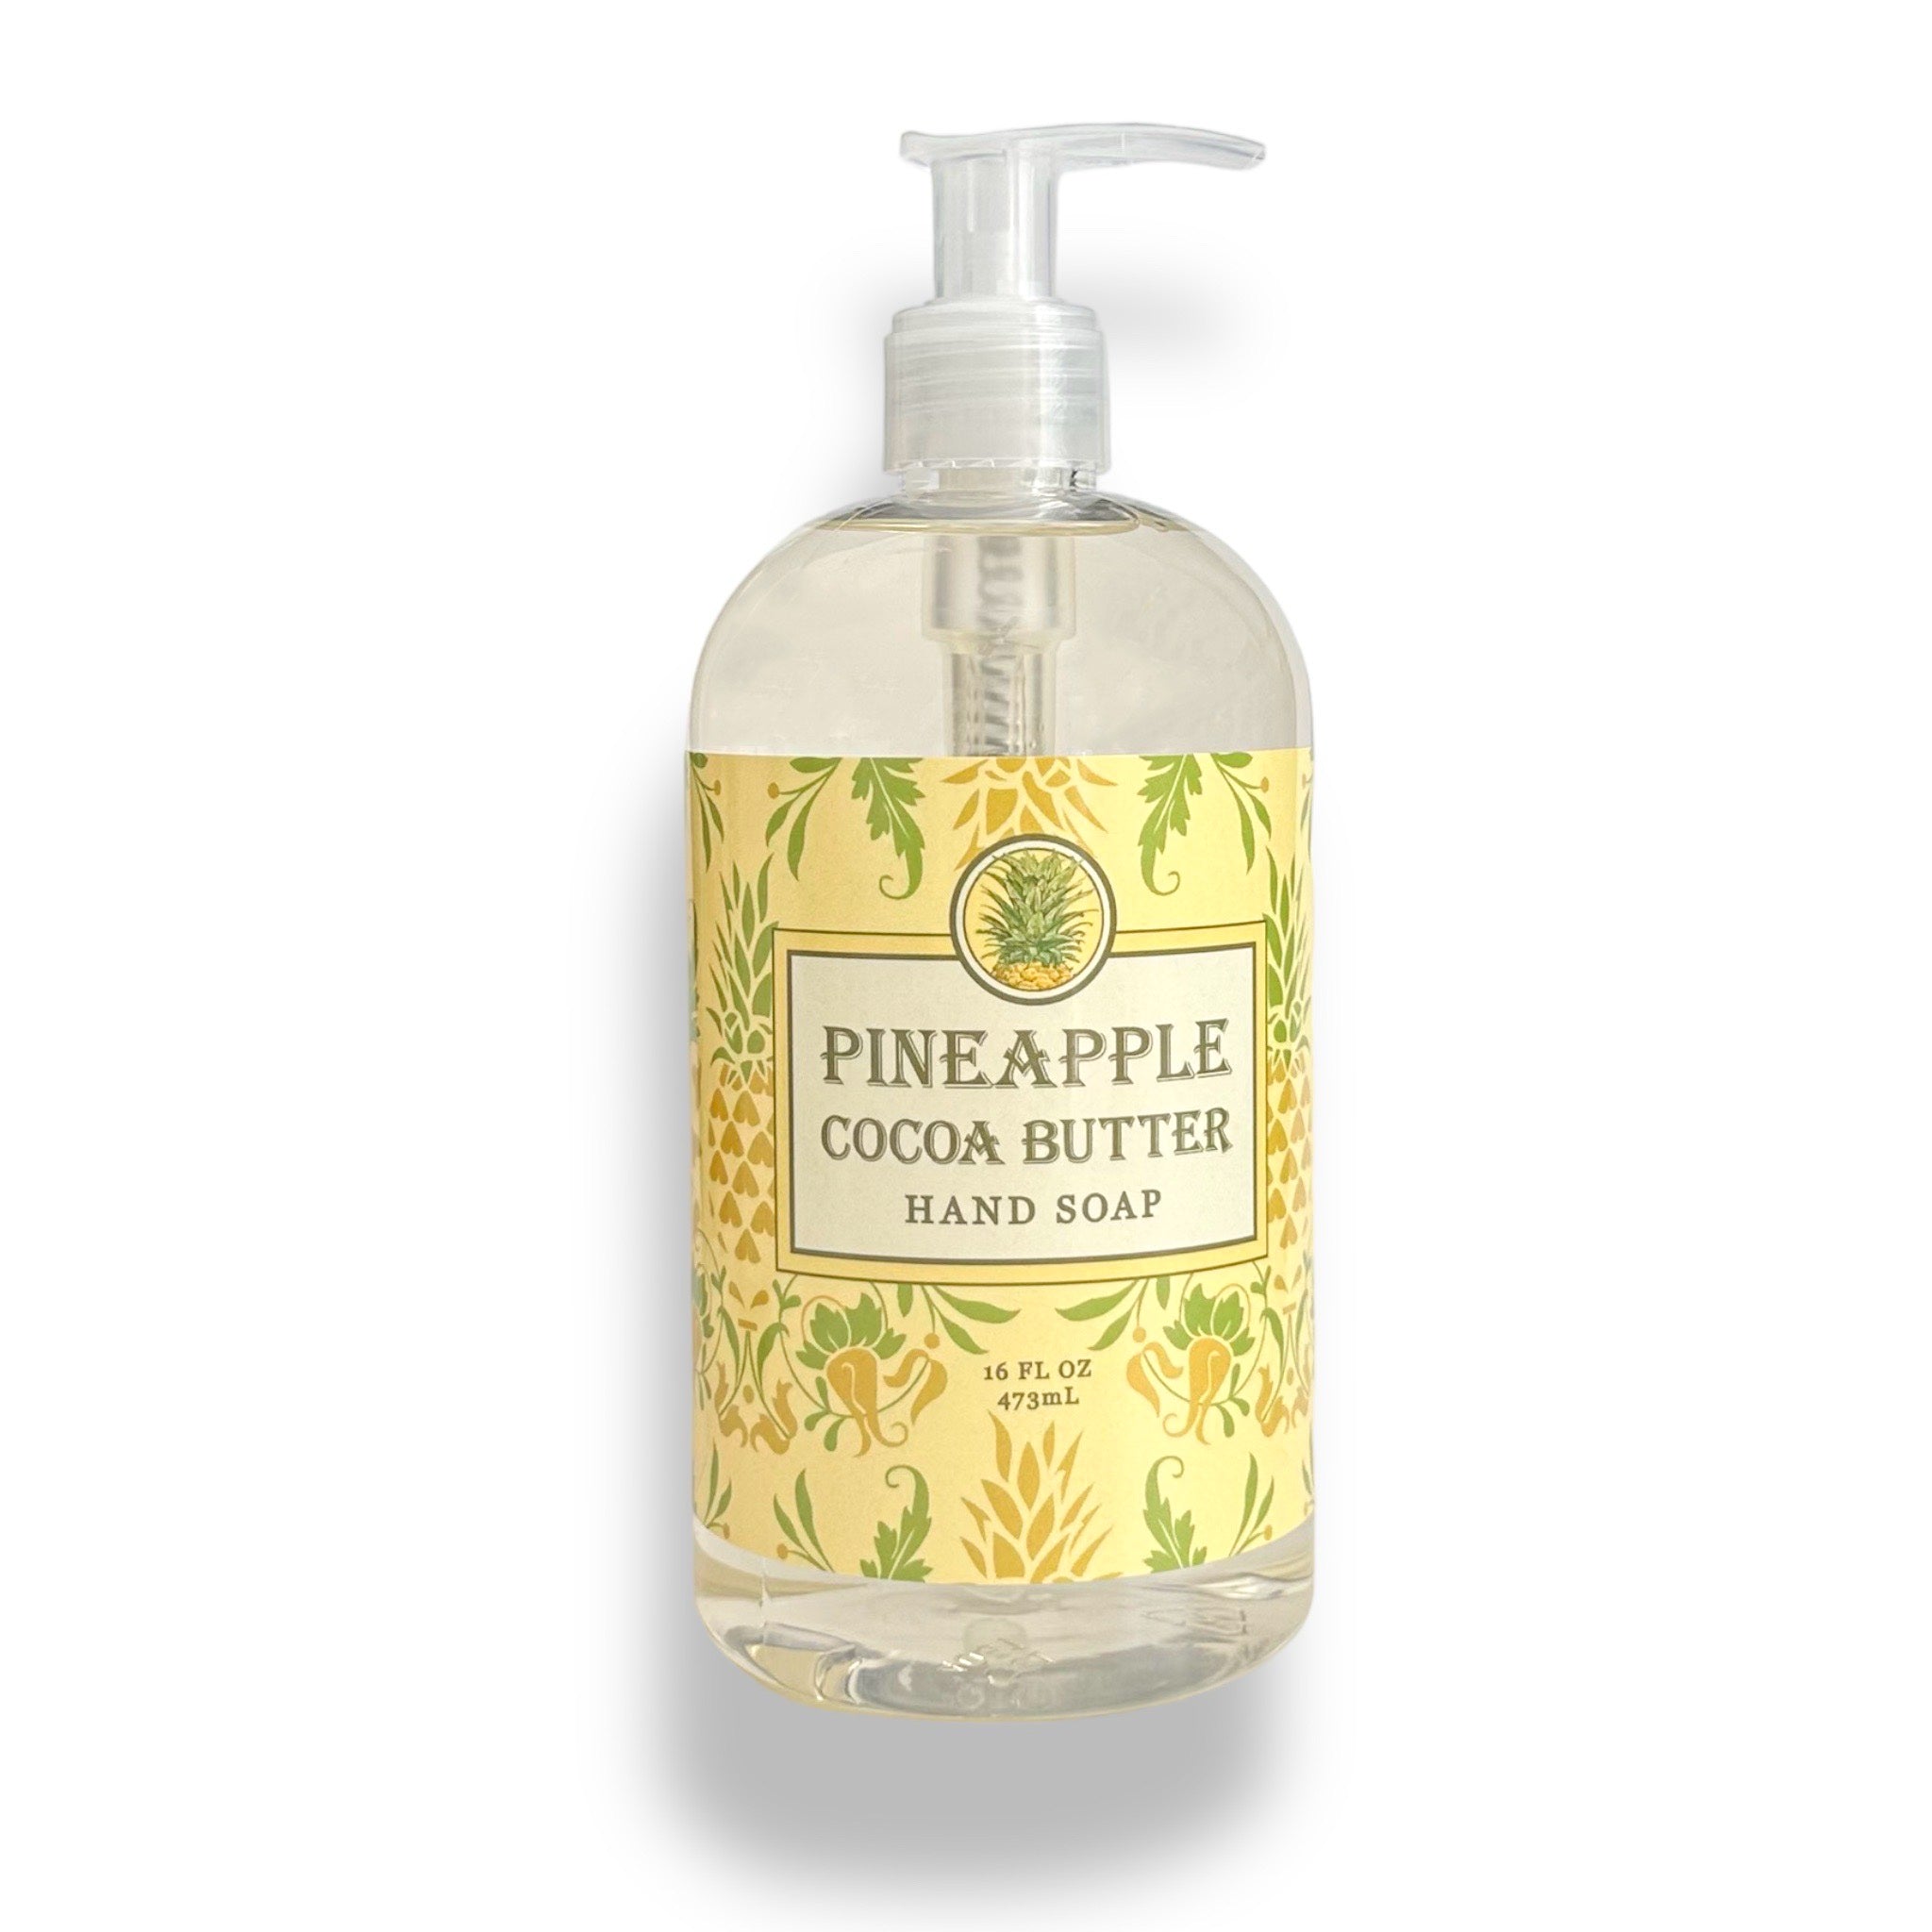 Greenwich Bay Taading Company Pineapple Cocoa Butter Hand Soap